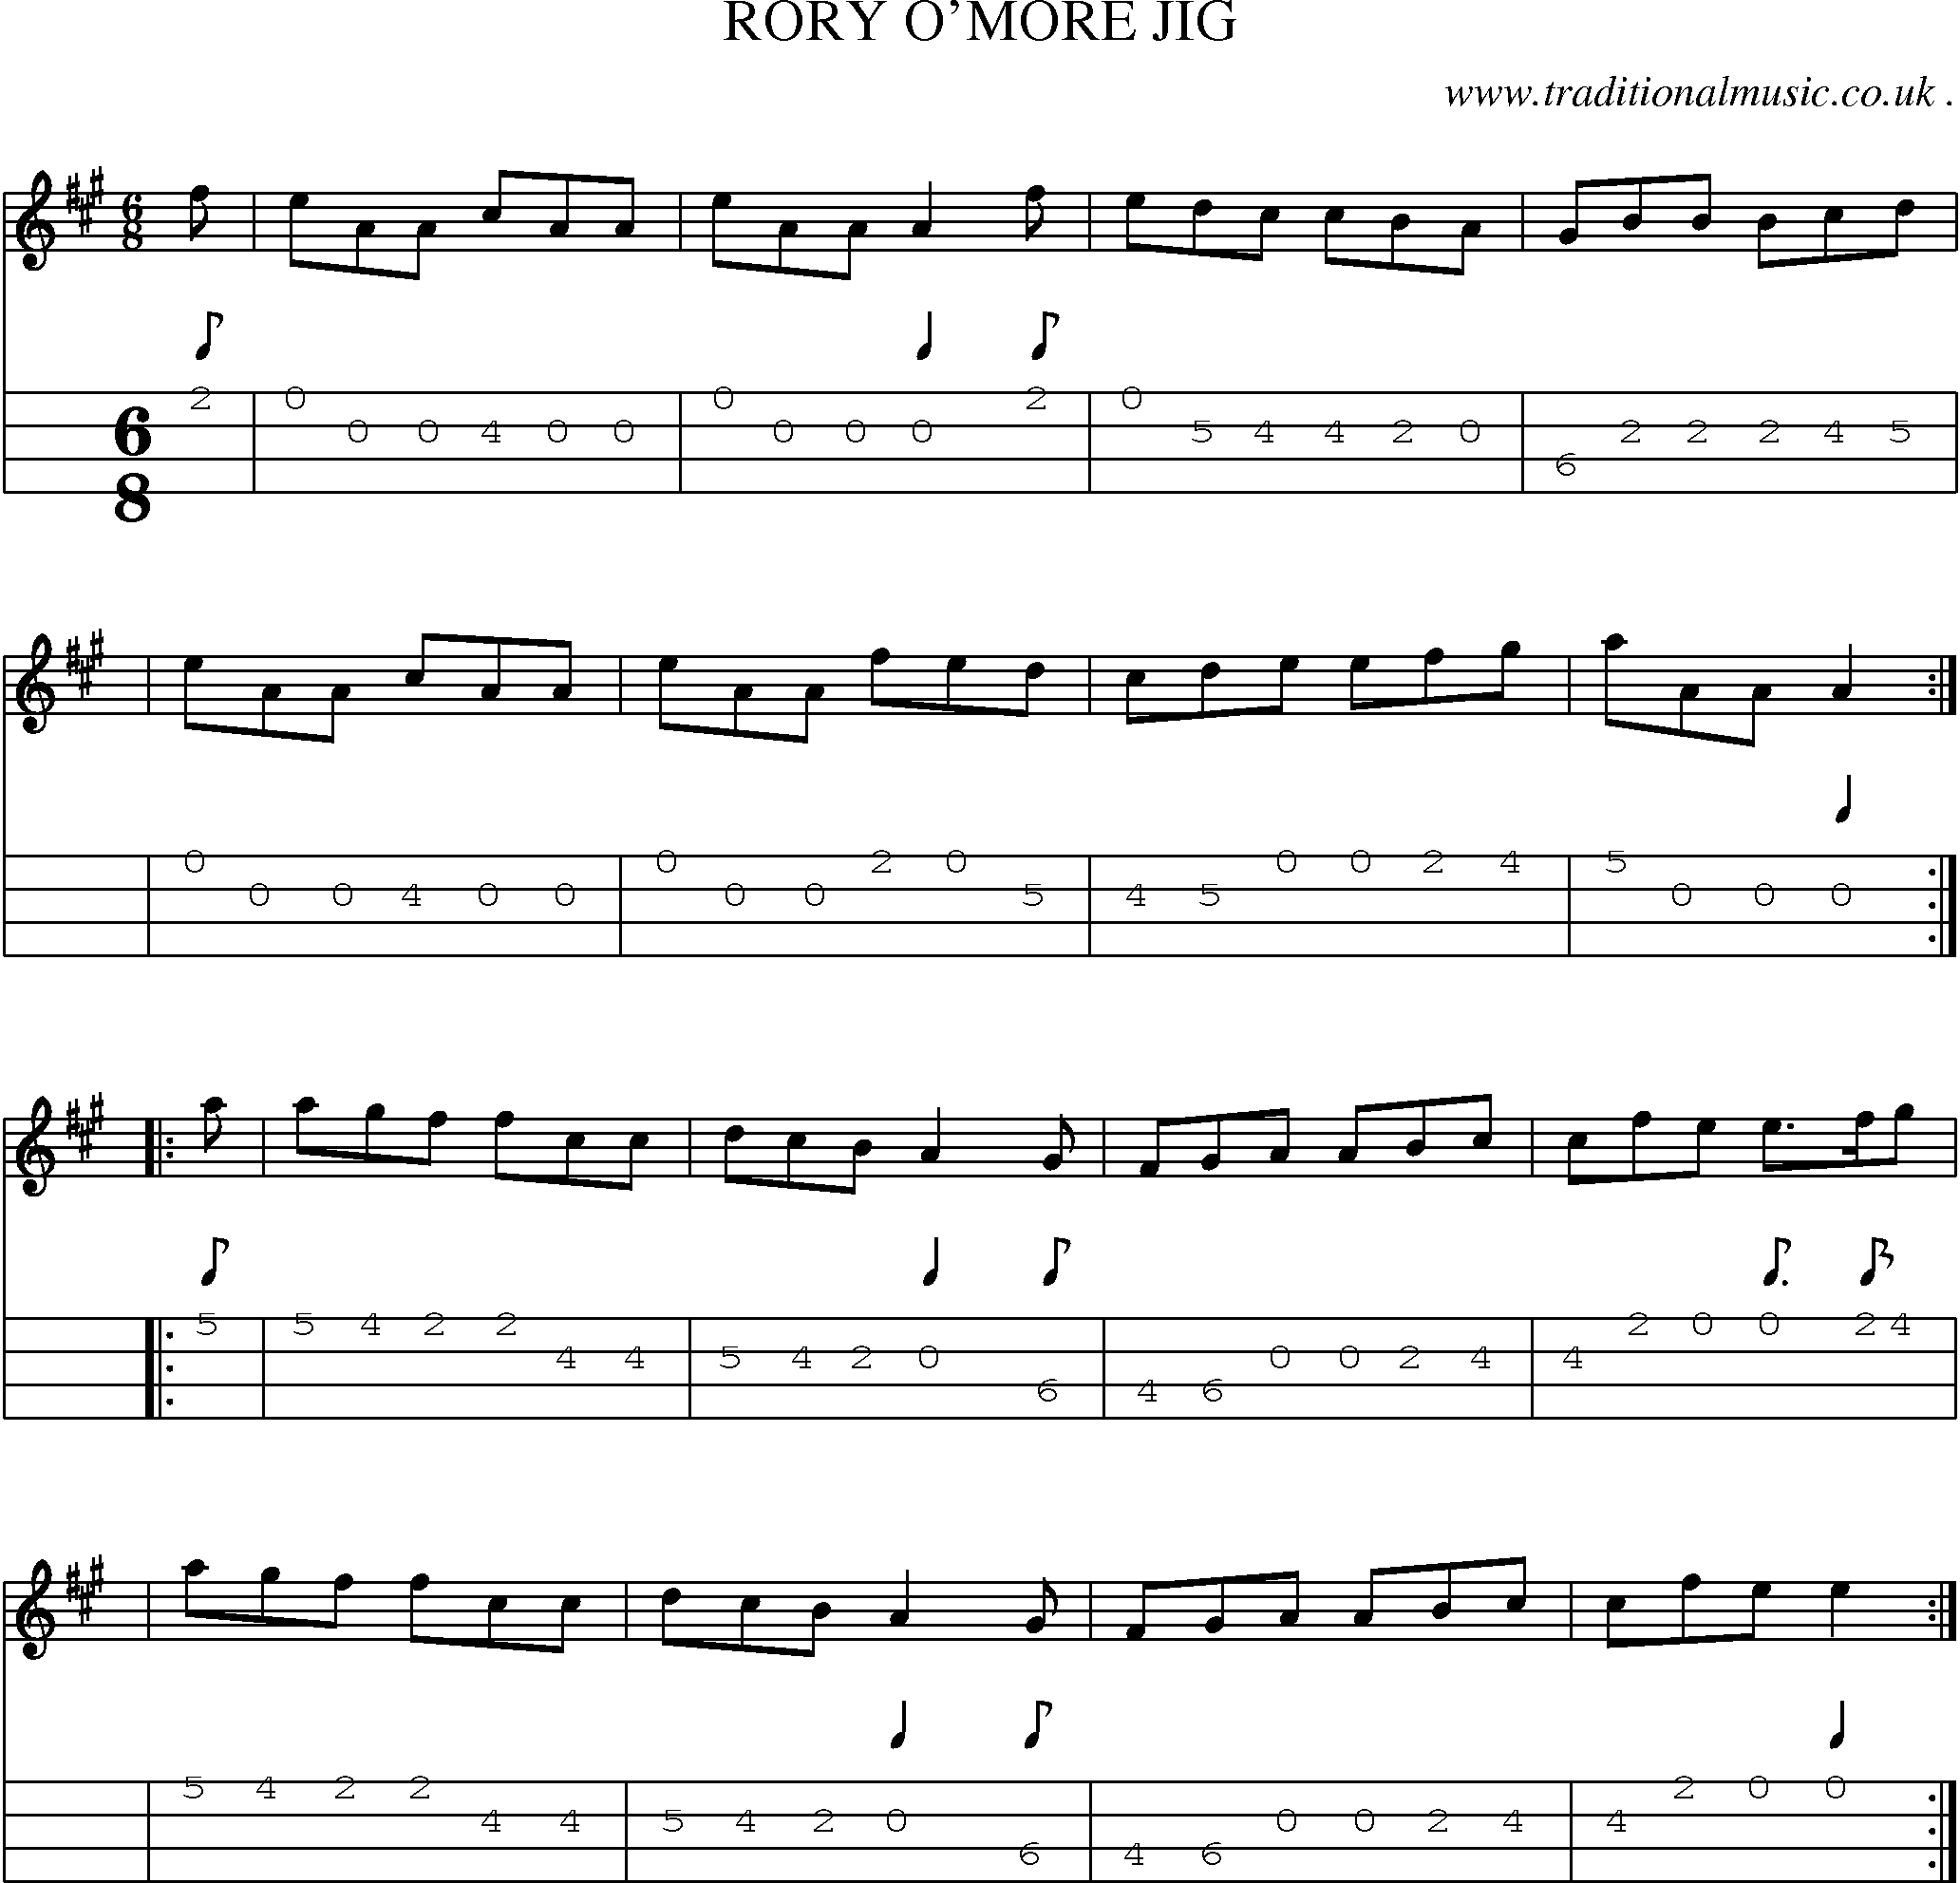 Sheet-Music and Mandolin Tabs for Rory Omore Jig